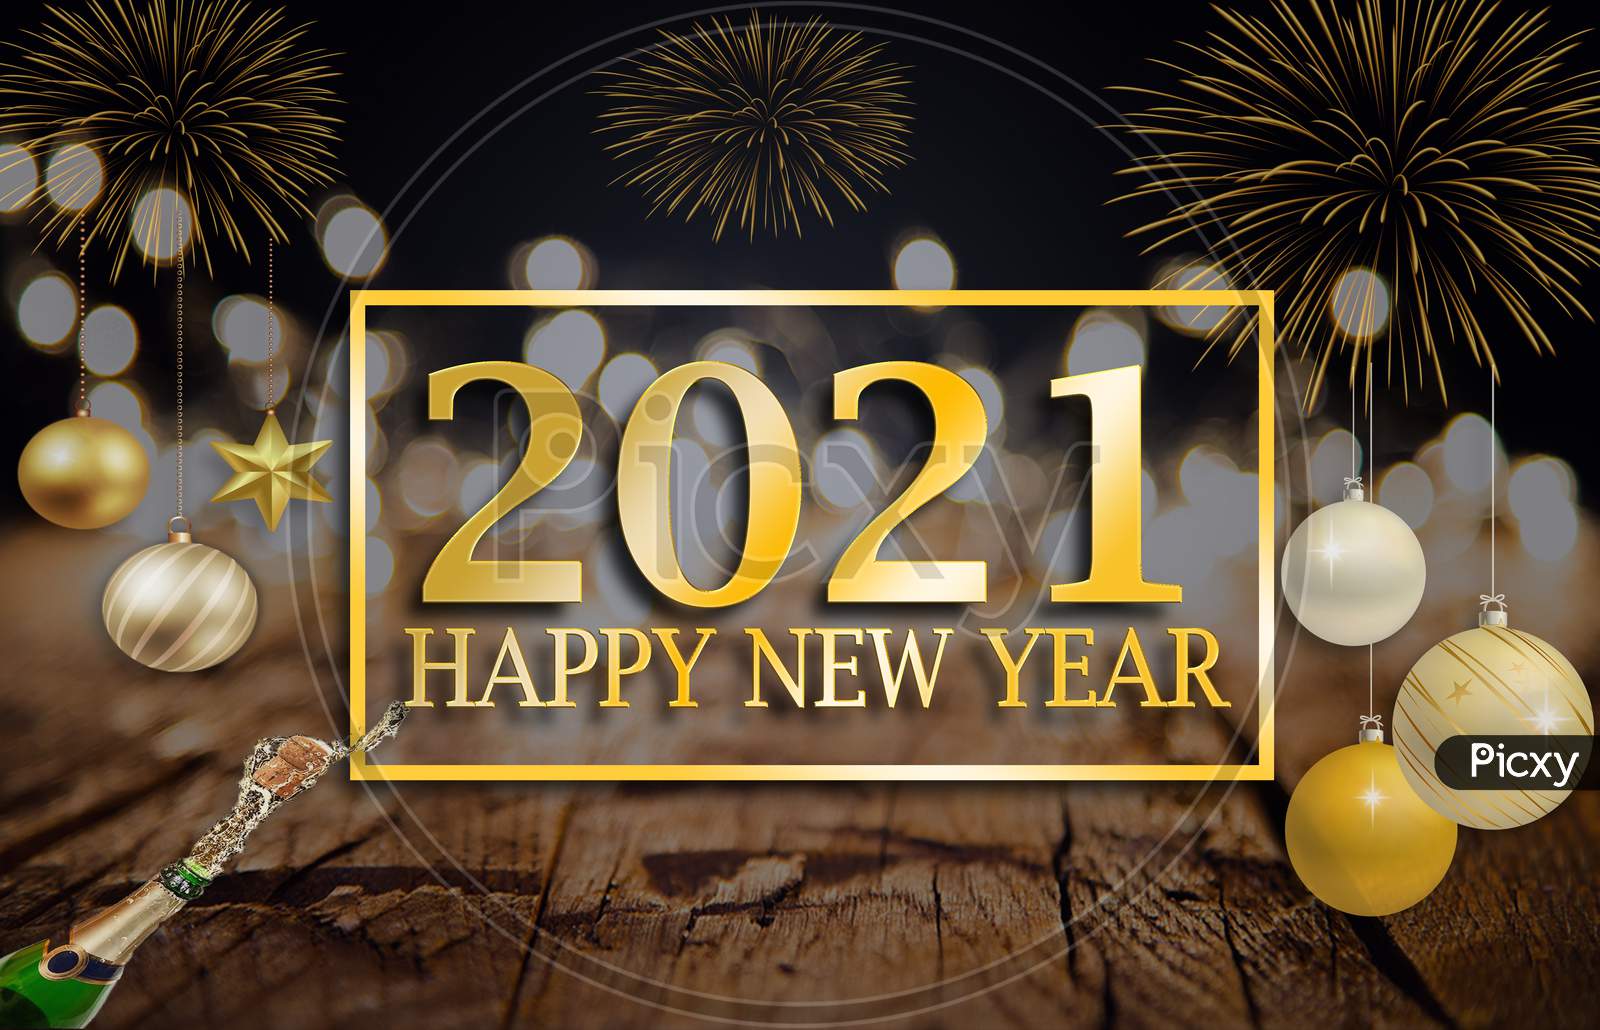 Happy New Year 2021 cards